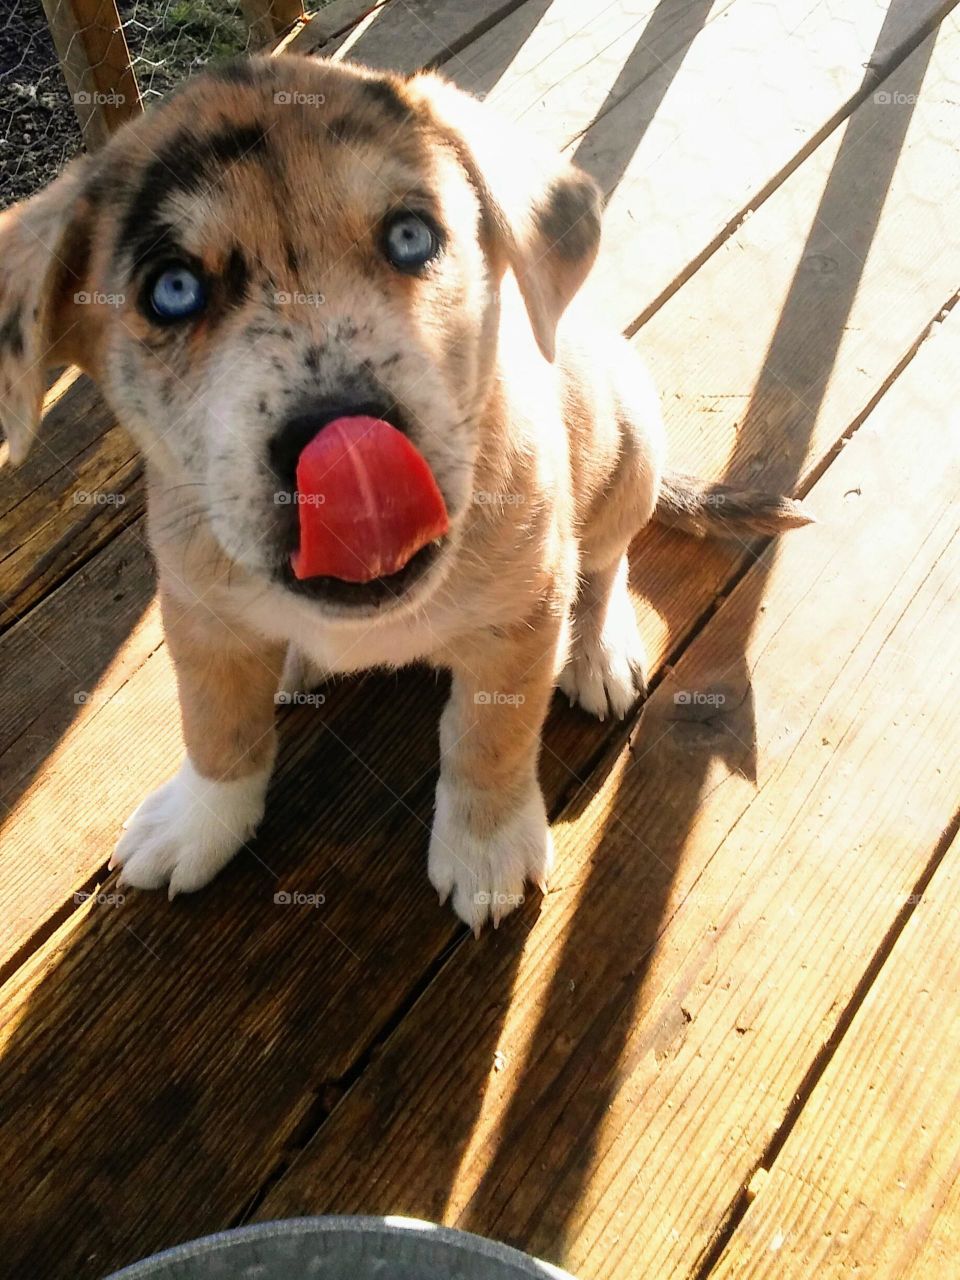 Cute puppy with bright blue eyes licking his nose